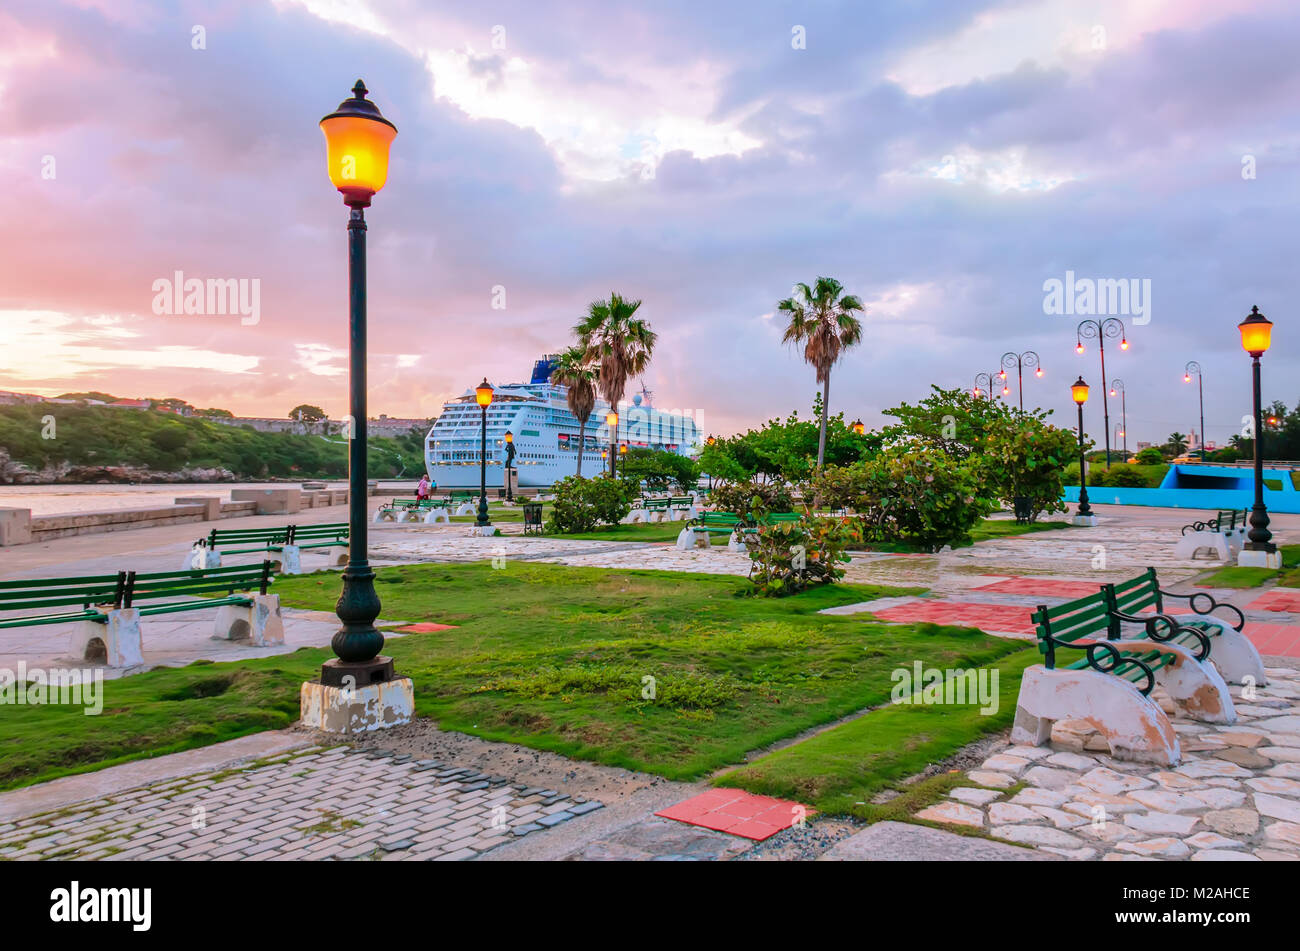 Embankment with luminous yellow light street lamps, palm trees, blue cruise liner, pink clouds, benches and green grass in morning Havana Stock Photo